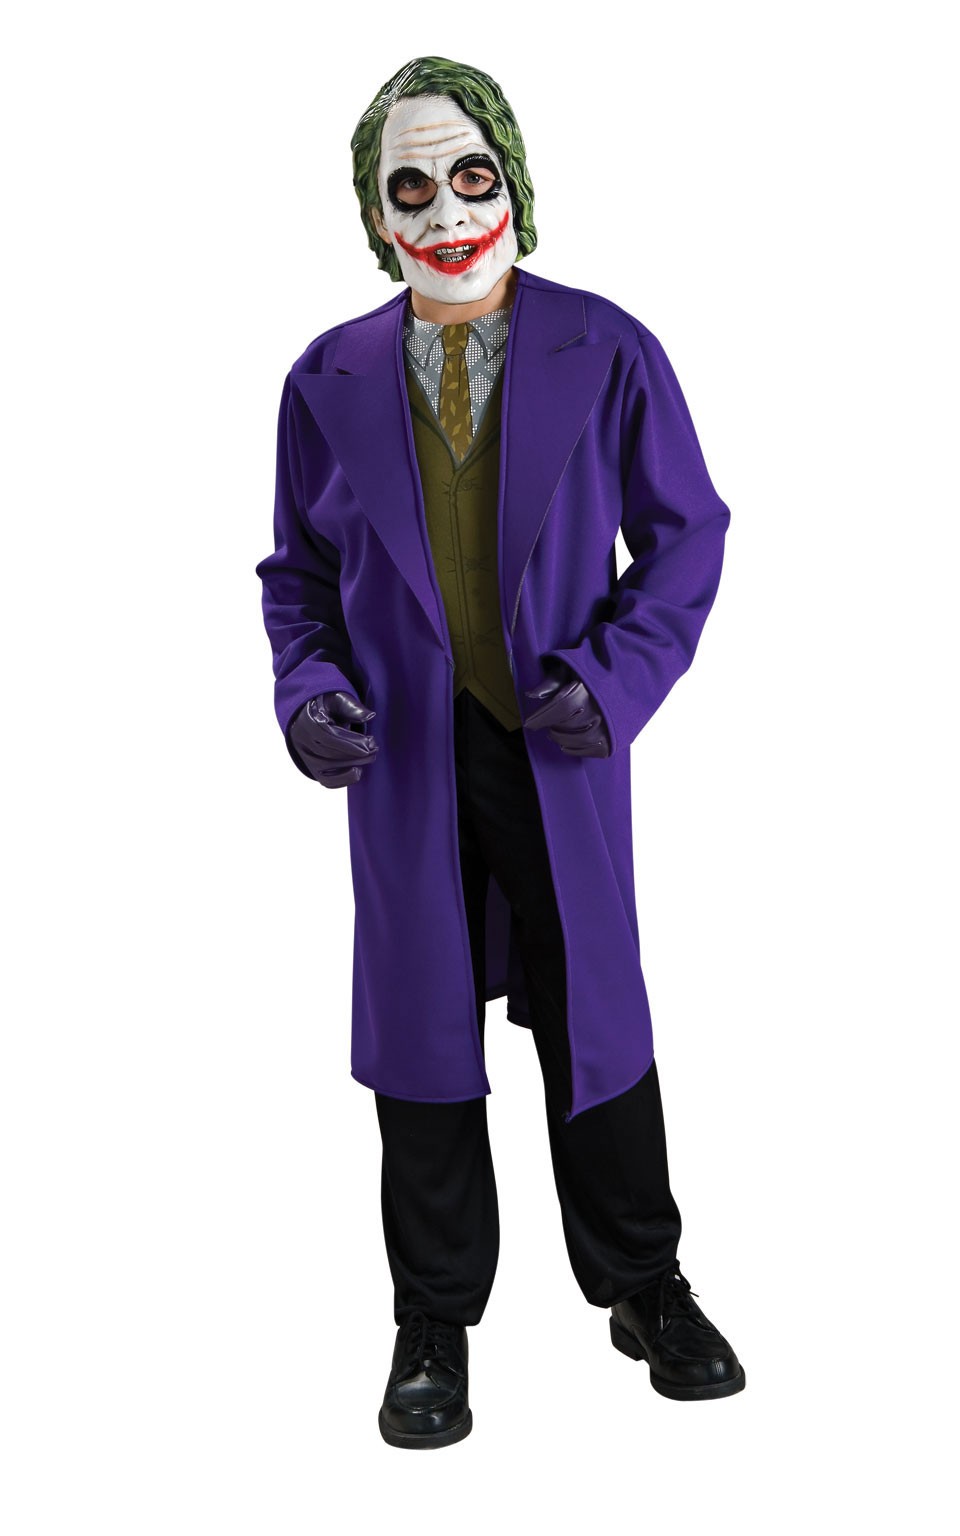 Official The Joker Childs Costume - The Mad Hatter